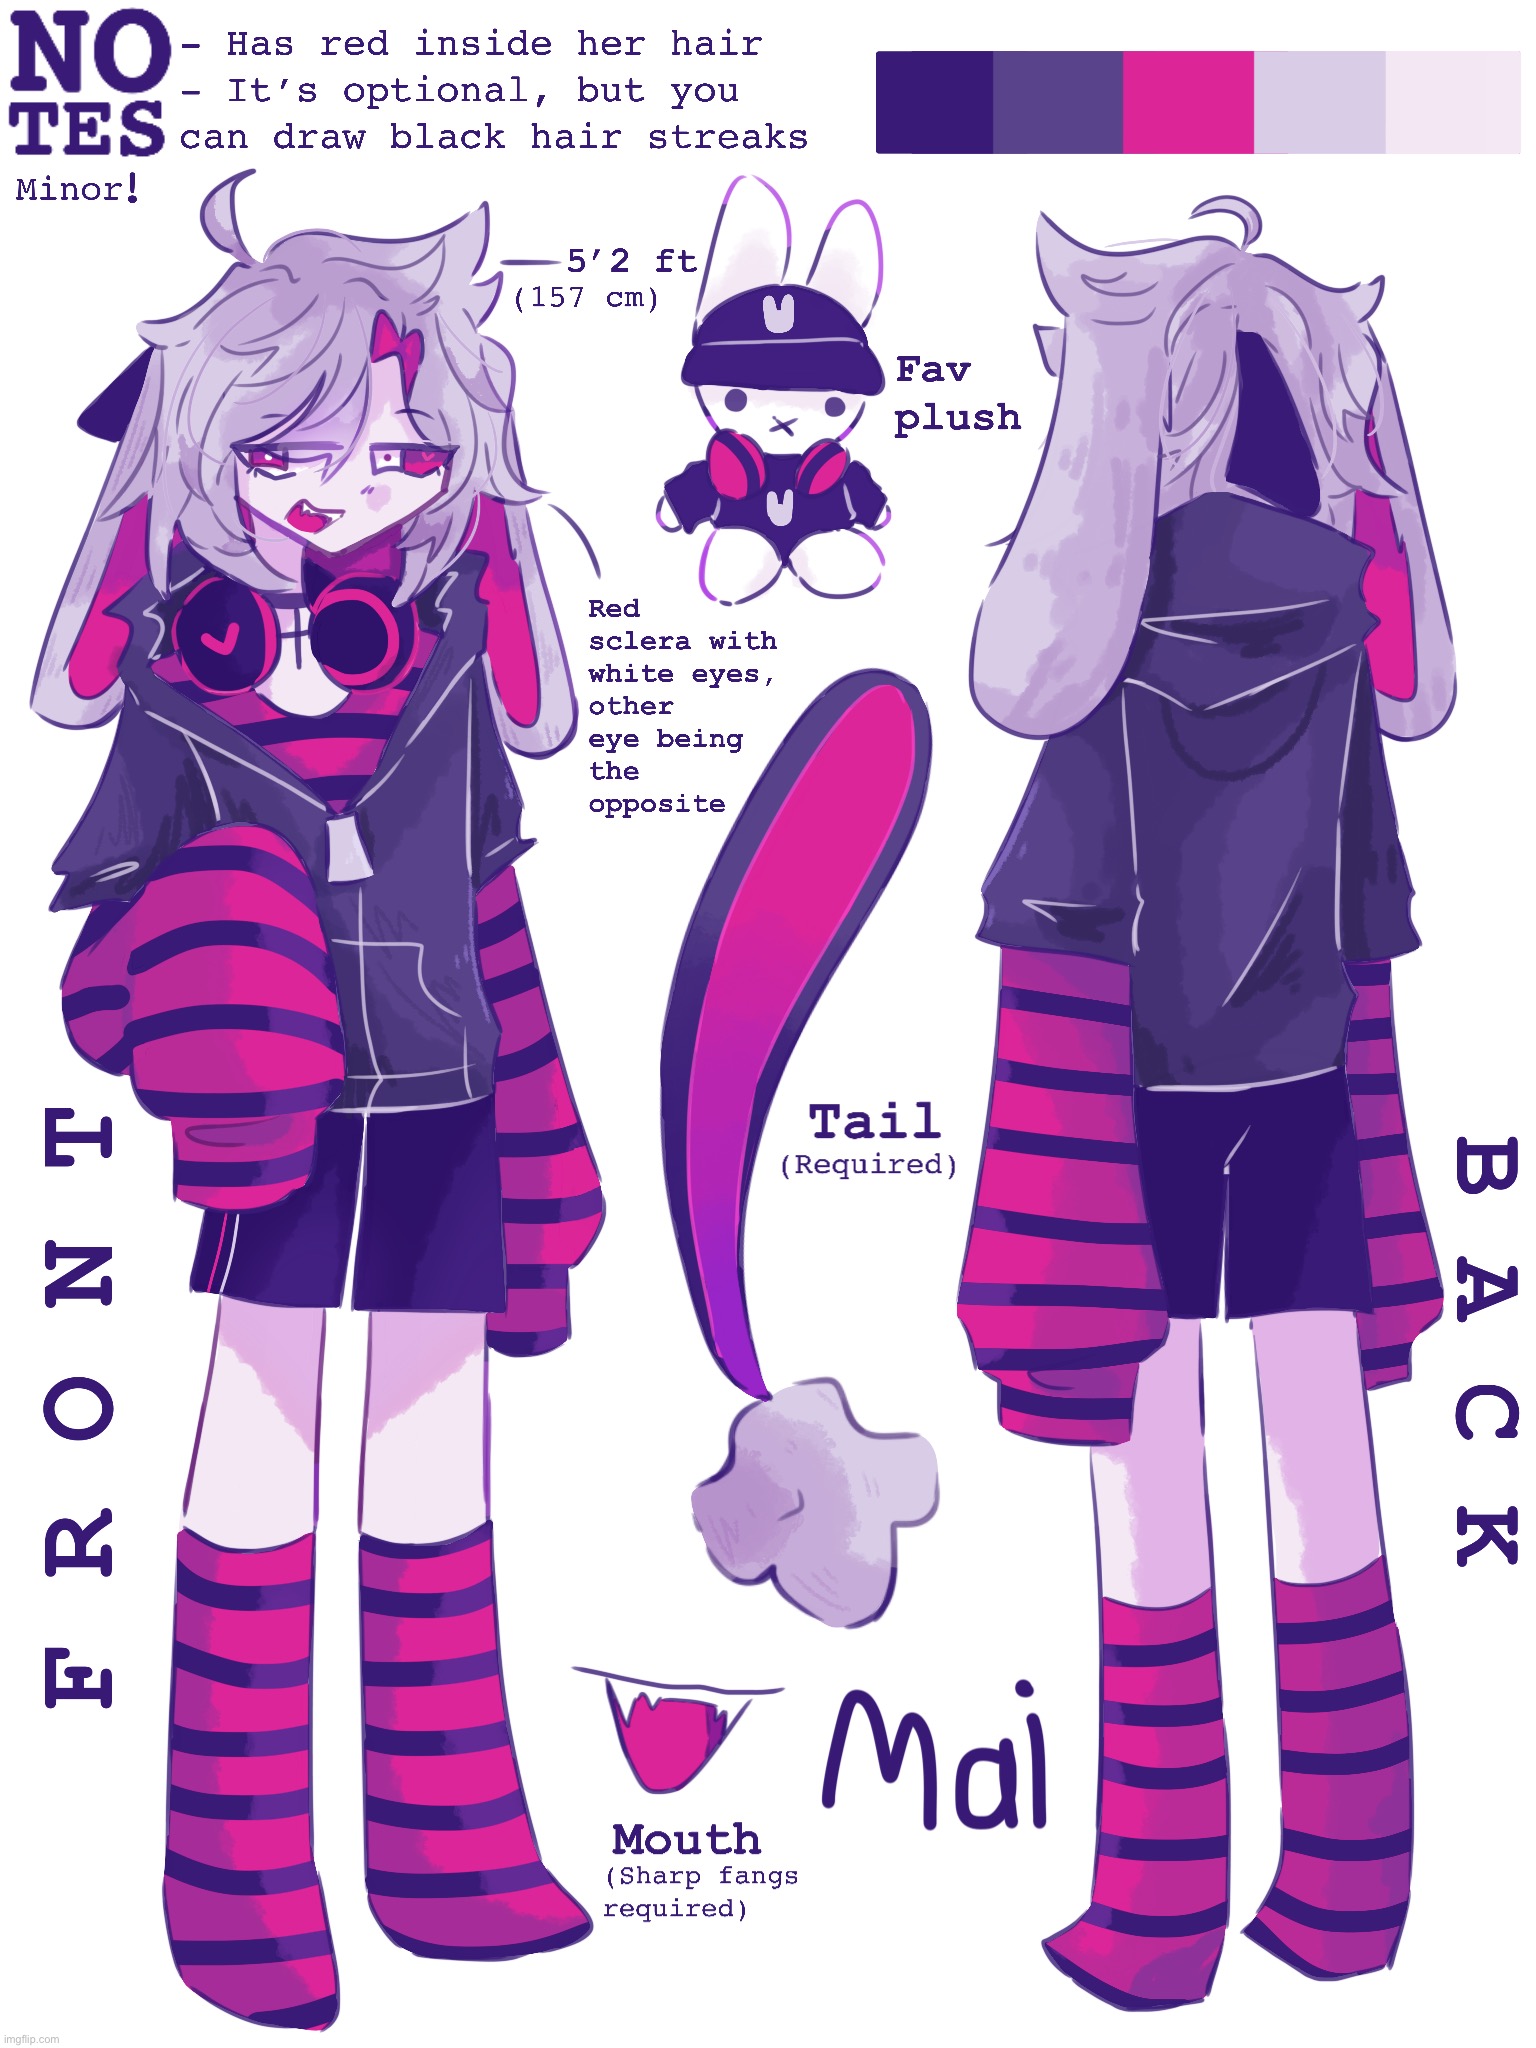 Sharkbunny. Anyways here’s Ravel’s little sister (info in image description) | Demigirl, She/them, 15 | Mai is Ravel’s little step-sister. A girl who is usually sleepy but is quite the sassy girl. Unlike most introverted people with an “I” in their MBTI, Mai isn’t afraid to socialize when needed but is just a homebody who prefers and loves sleeping a lot. She is silly and immature like what a 15-year-old girl would usually be. When around her brother she does not censor her thoughts at all, even if it’s just blatantly cursing at him. Still quite uncertain about her future, but has a vague dream of becoming a writer or novelist. Ravel is purely a shark but Mai is a sharkbunny, how did that happen? Y’know, Mai came after Ravel’s mother who is a bunny remarried with another shark guy. Mai currently used to live with Ravel but is currently living with her parents. | made w/ Imgflip meme maker